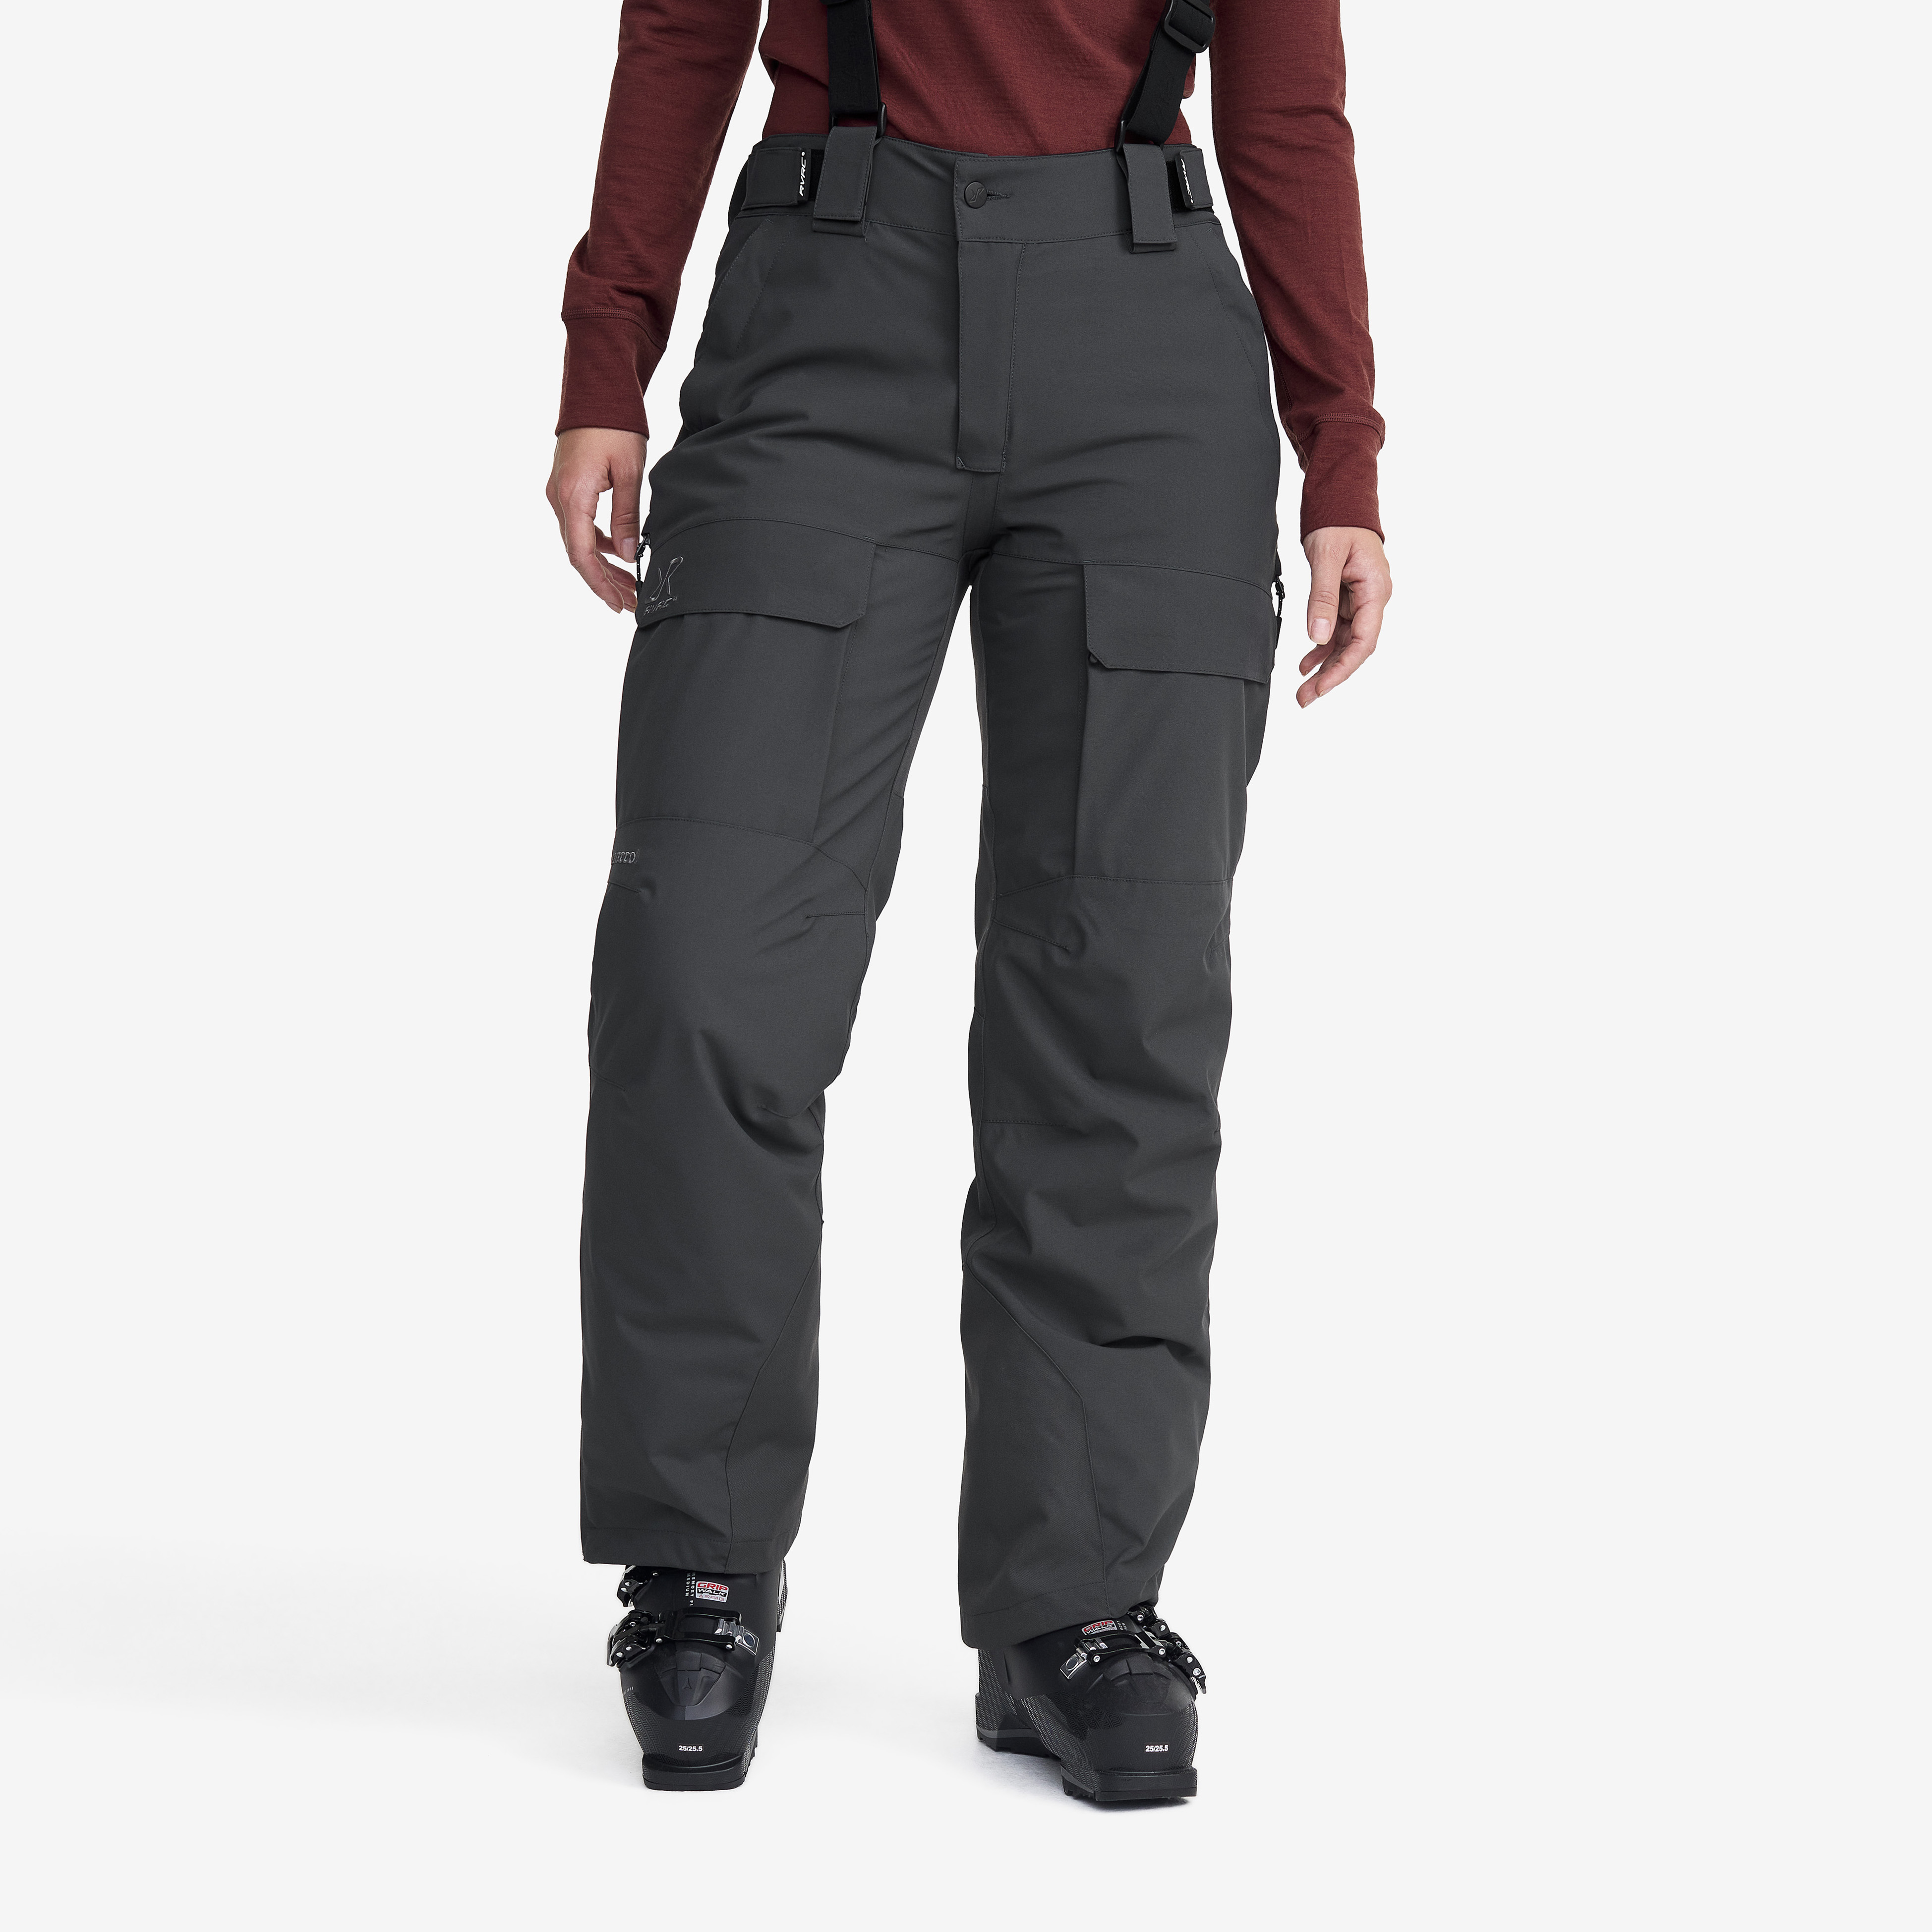 Halo 2L Insulated Ski Pants Anthracite Femme